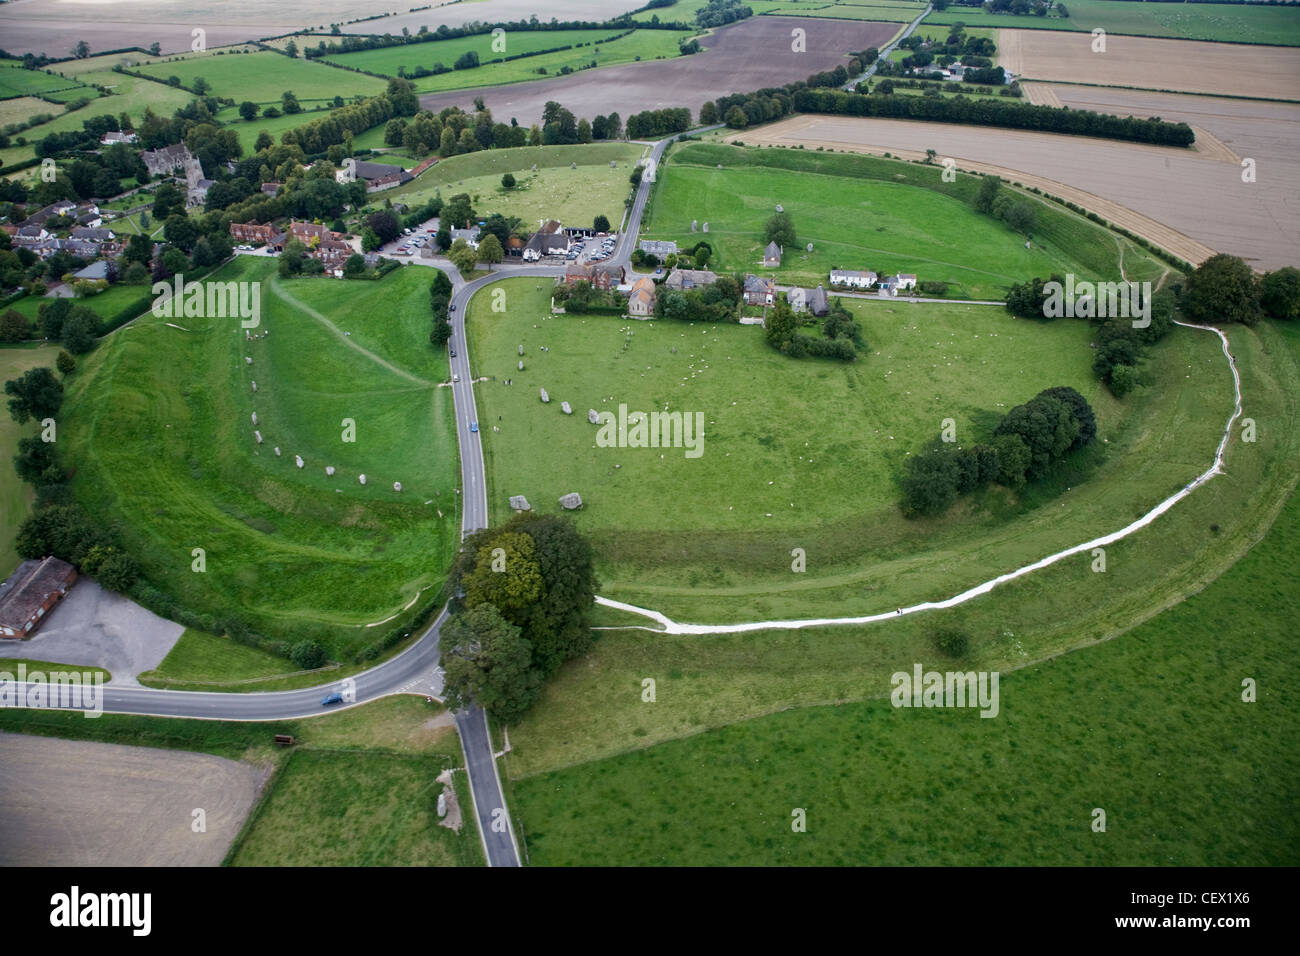 Aerial view of the village of Avebury and Avebury stone circle, a world heritage site and one of Europe's largest prehistoric st Stock Photo